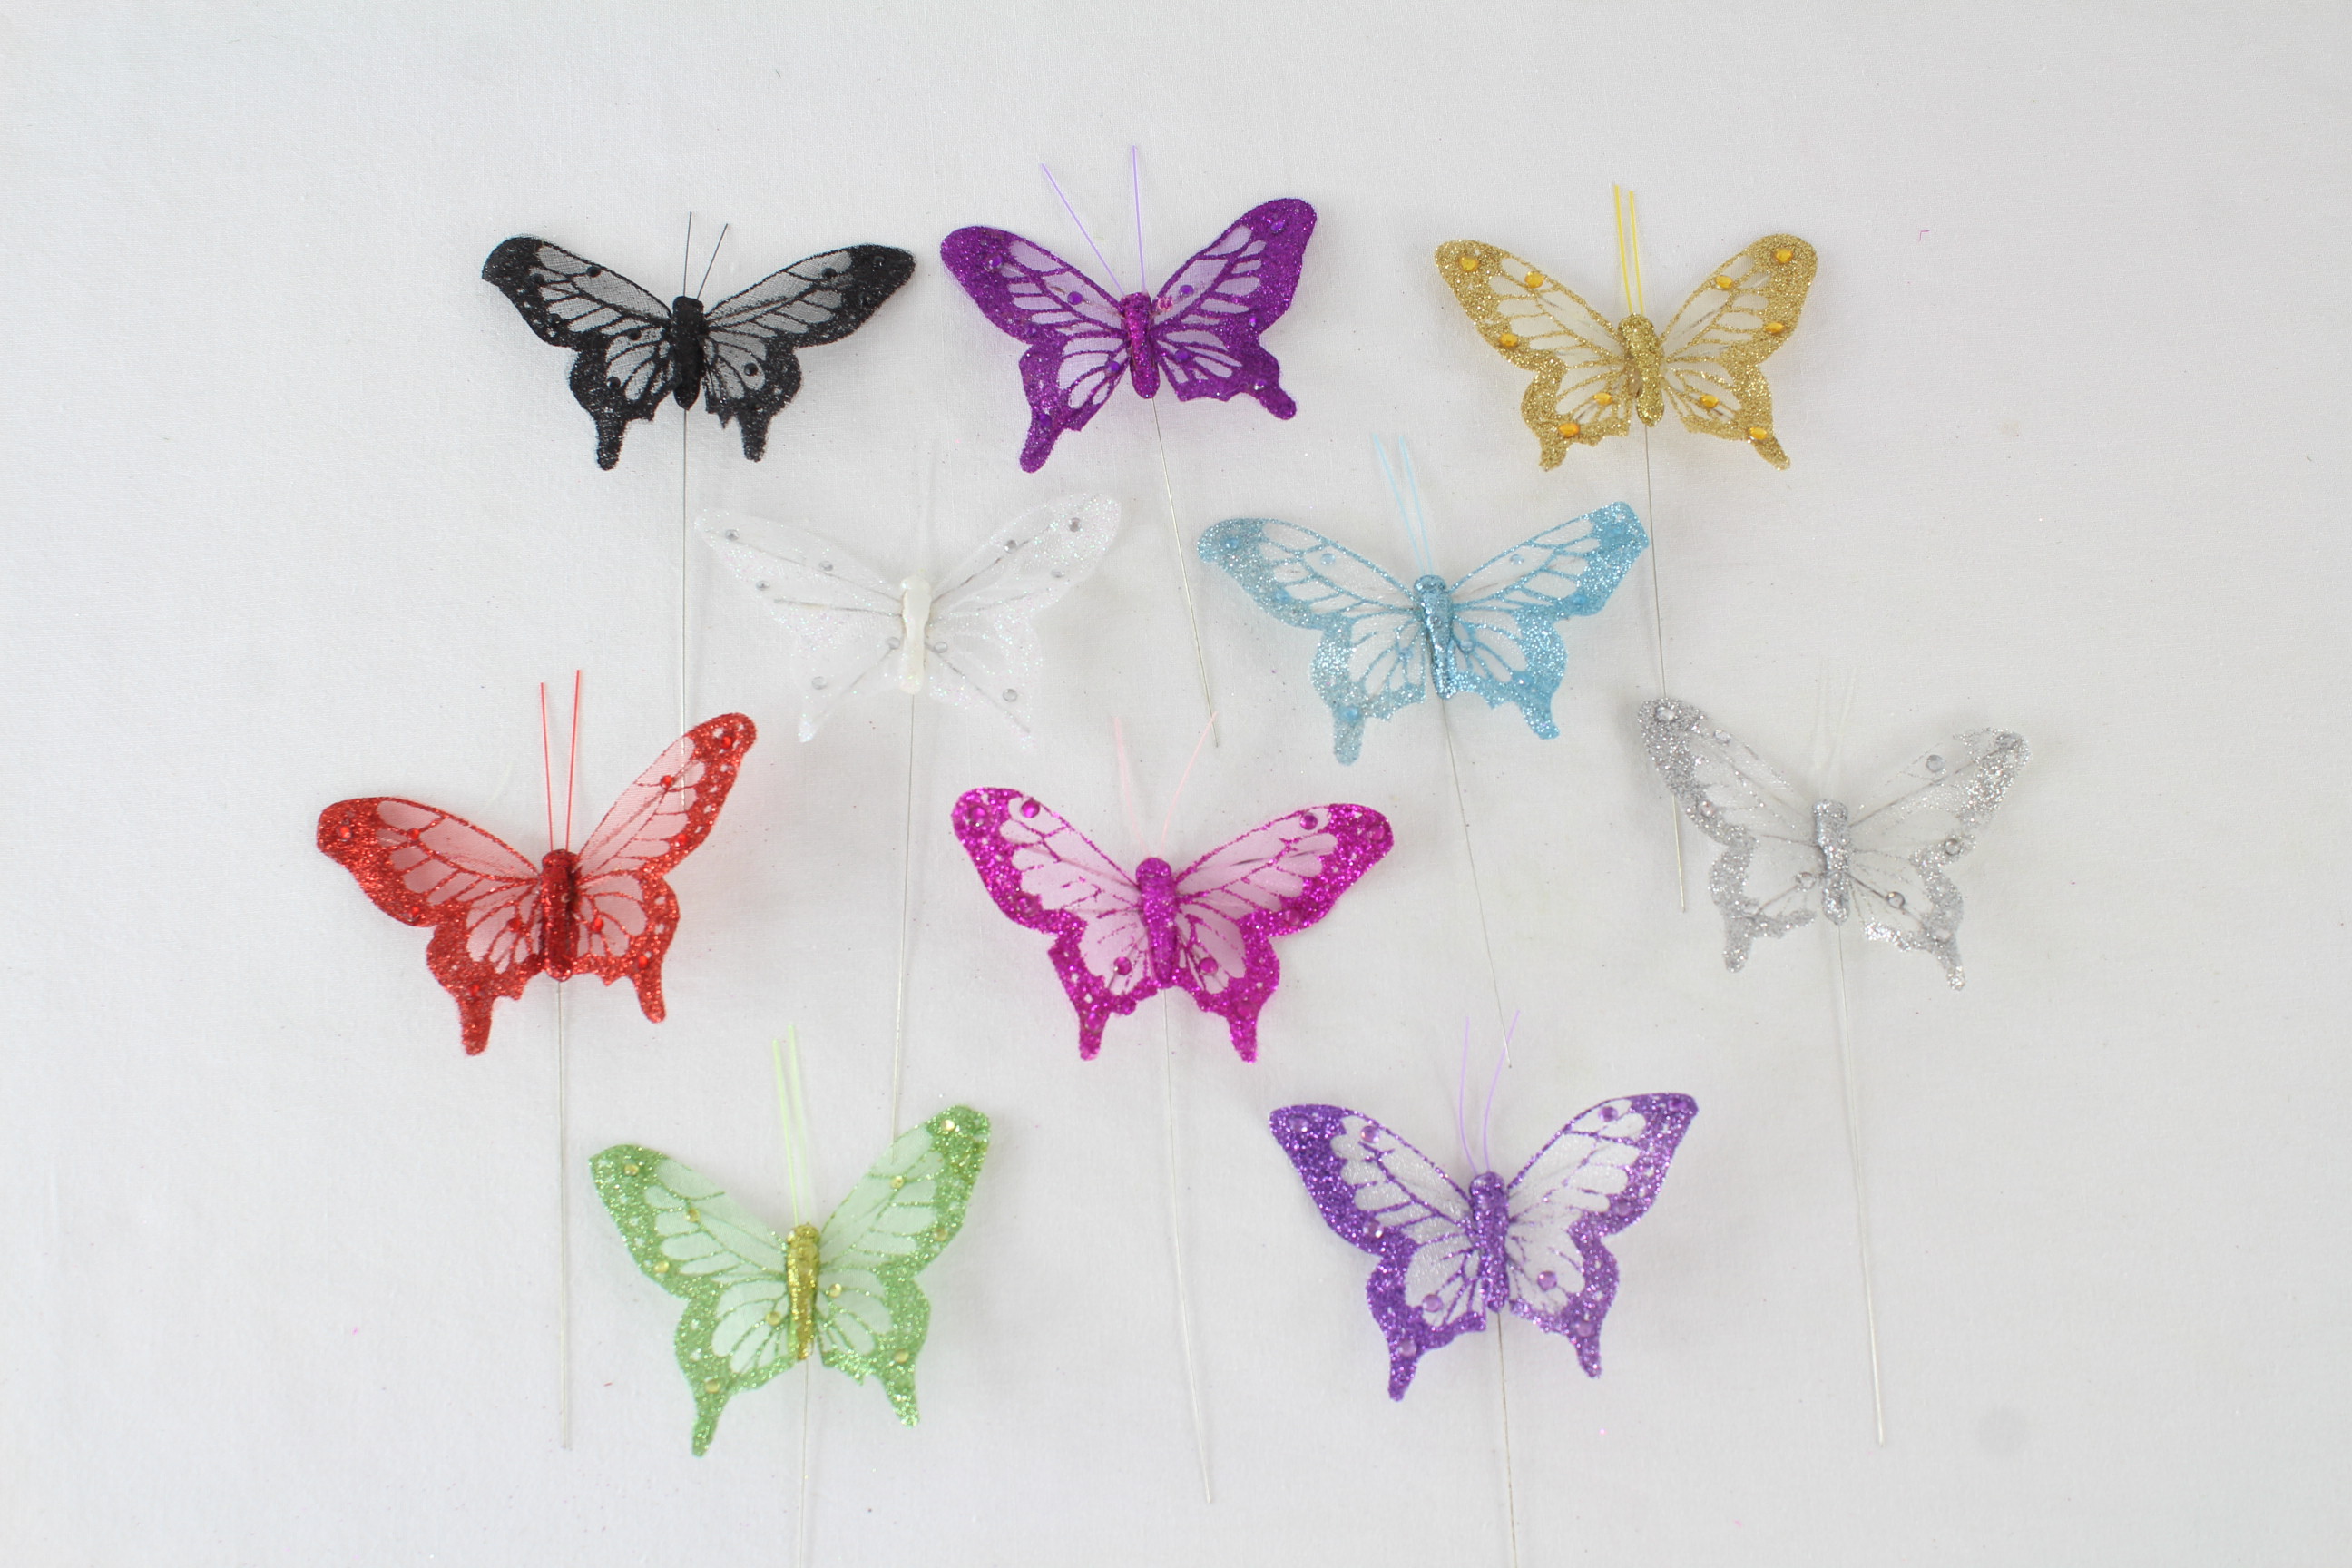 60 x 8cm Sheer Wing Glitter Decorated Butterflies on Wires